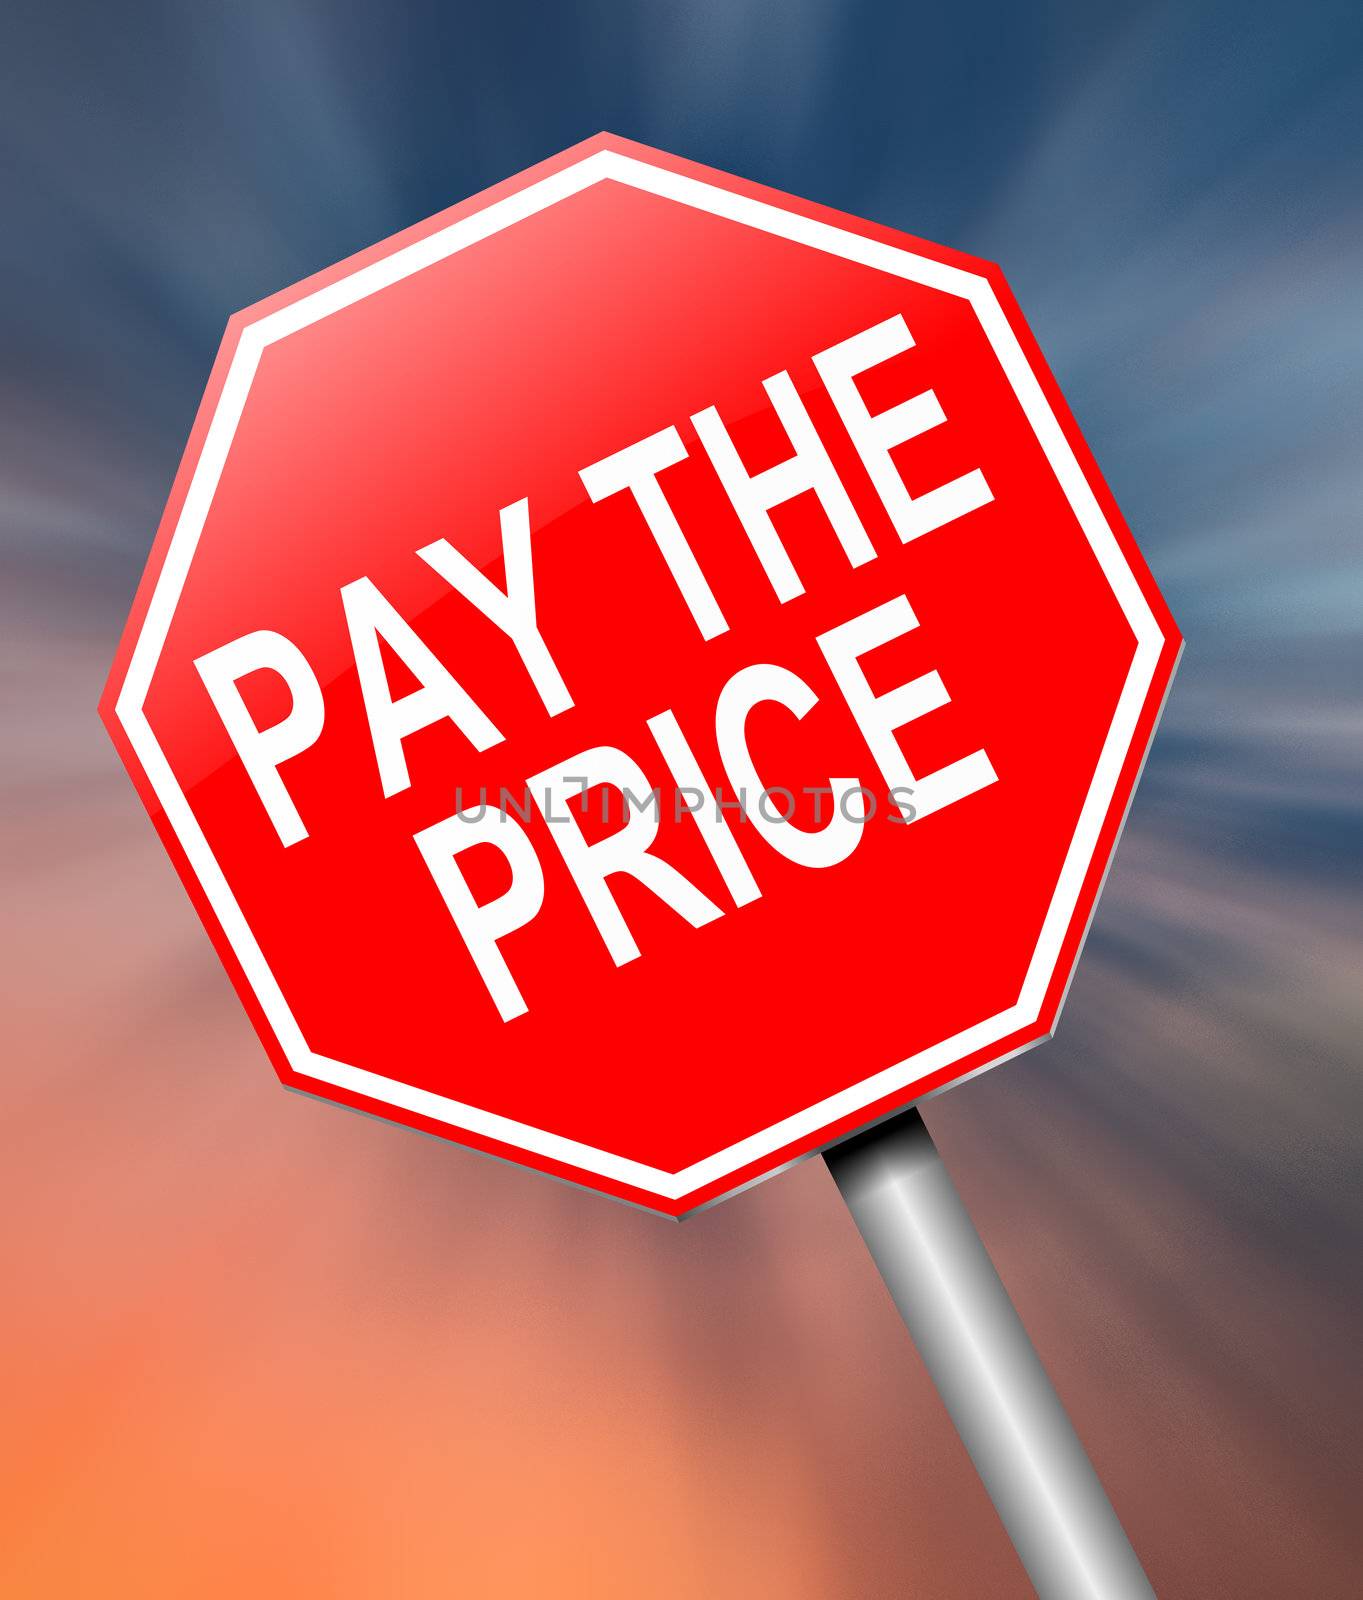 Illustration depicting a sign with a pay the price concept.